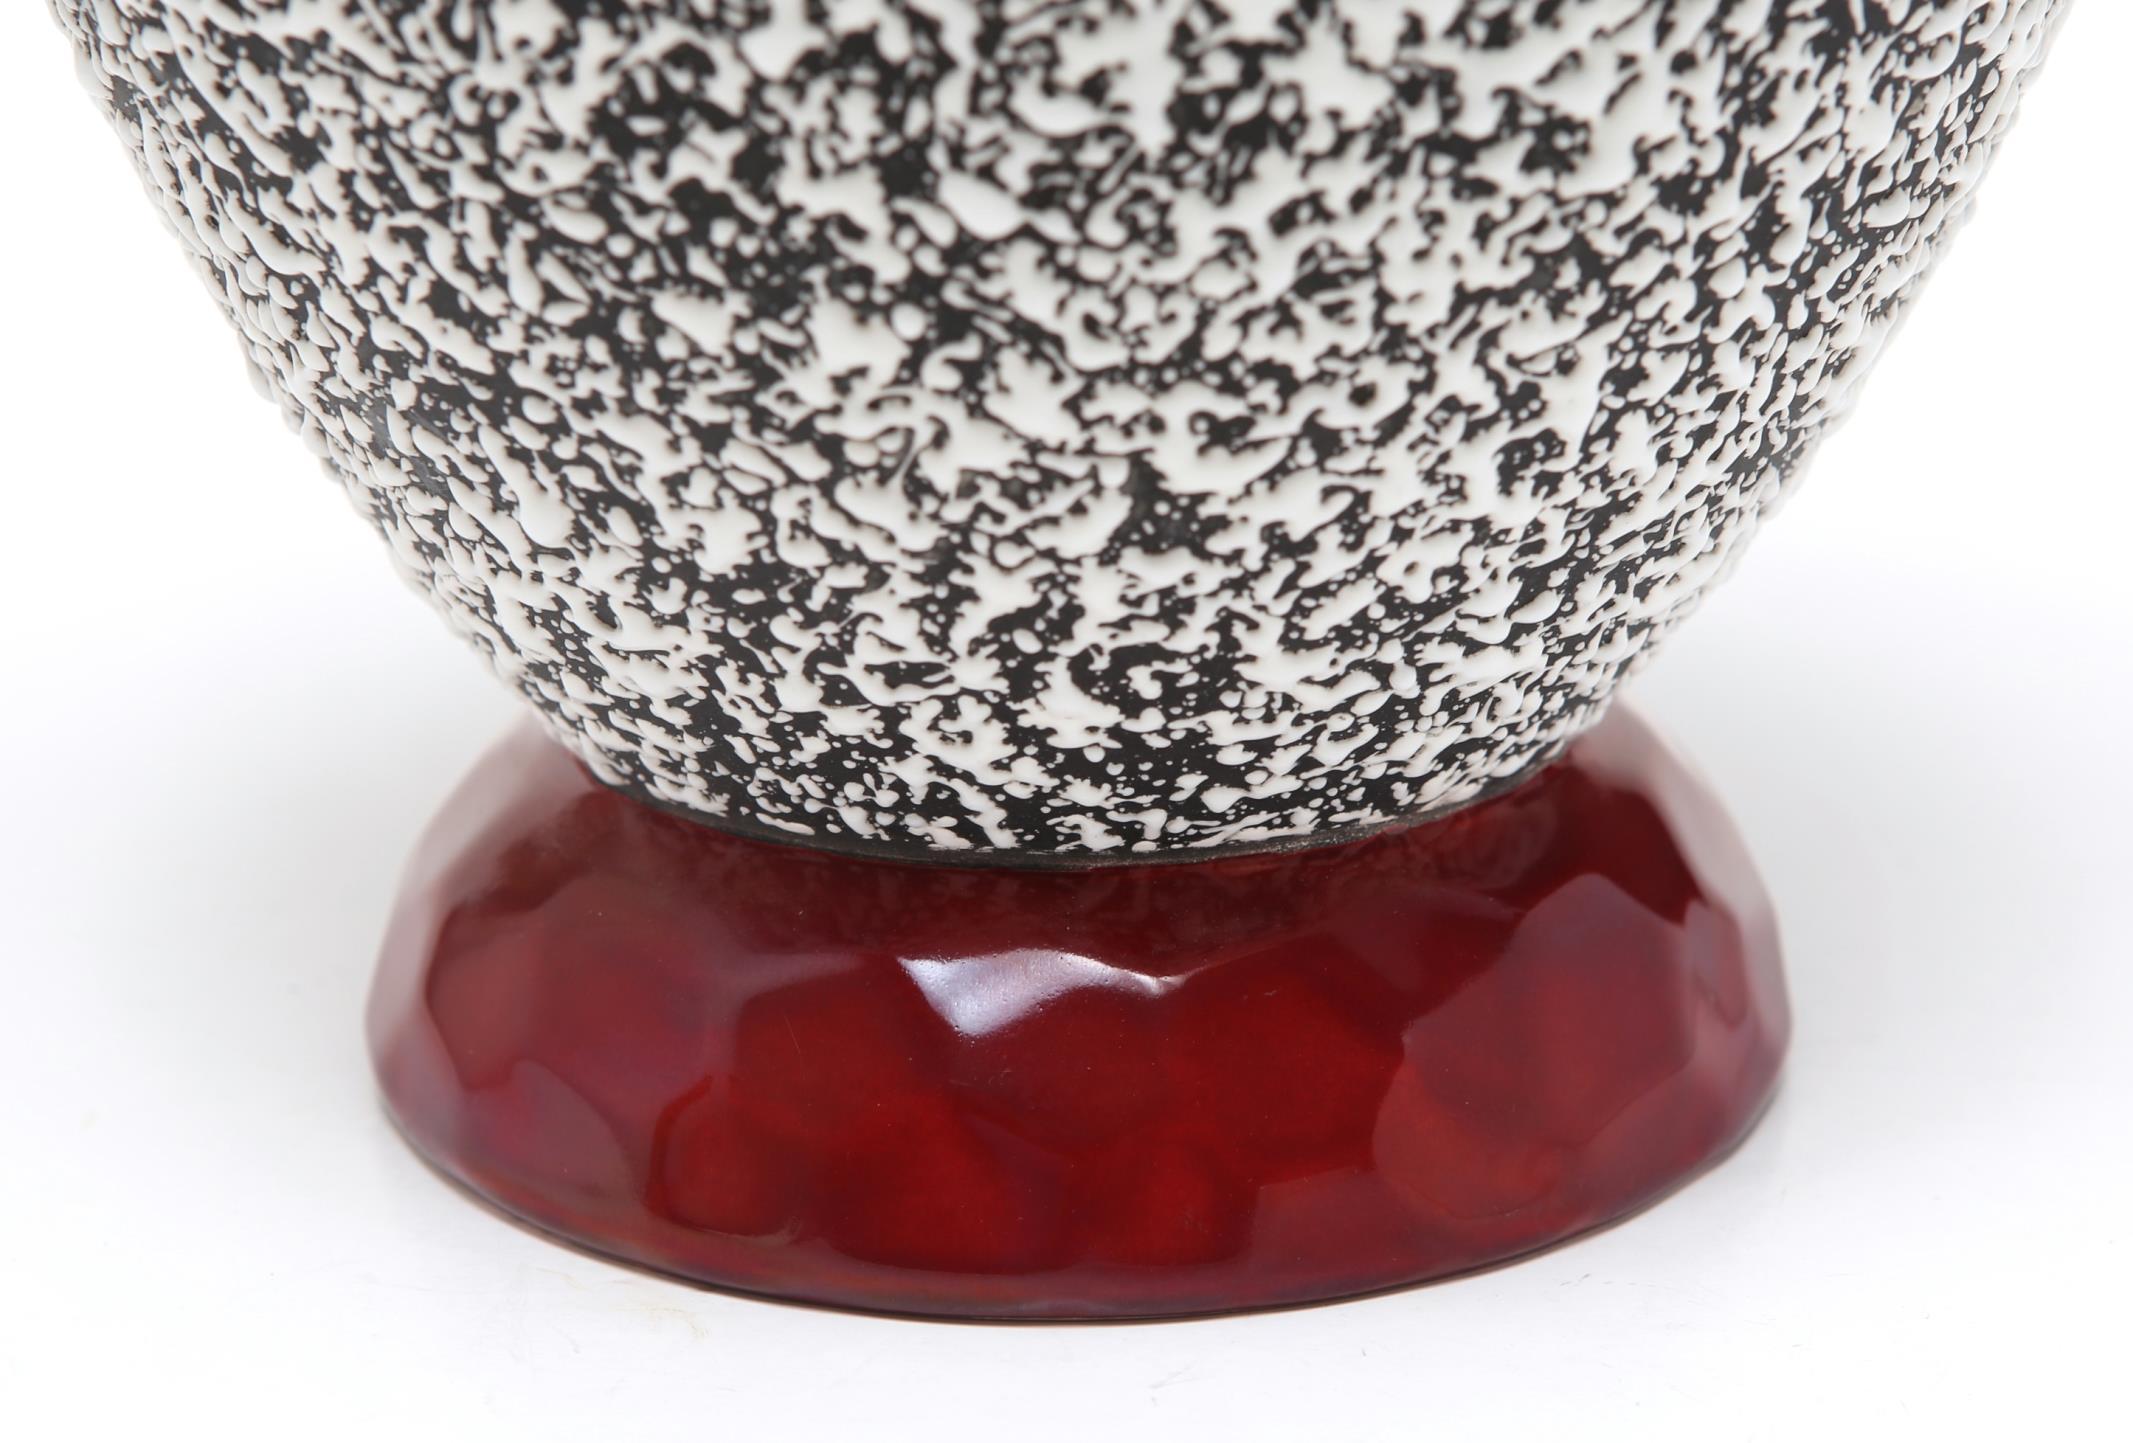 French Art Deco globular Sevres ceramic vase designed by Paul Milet in the 1930s. The piece has oxblood red and anthracite gray glazes and an all-over white enamel 